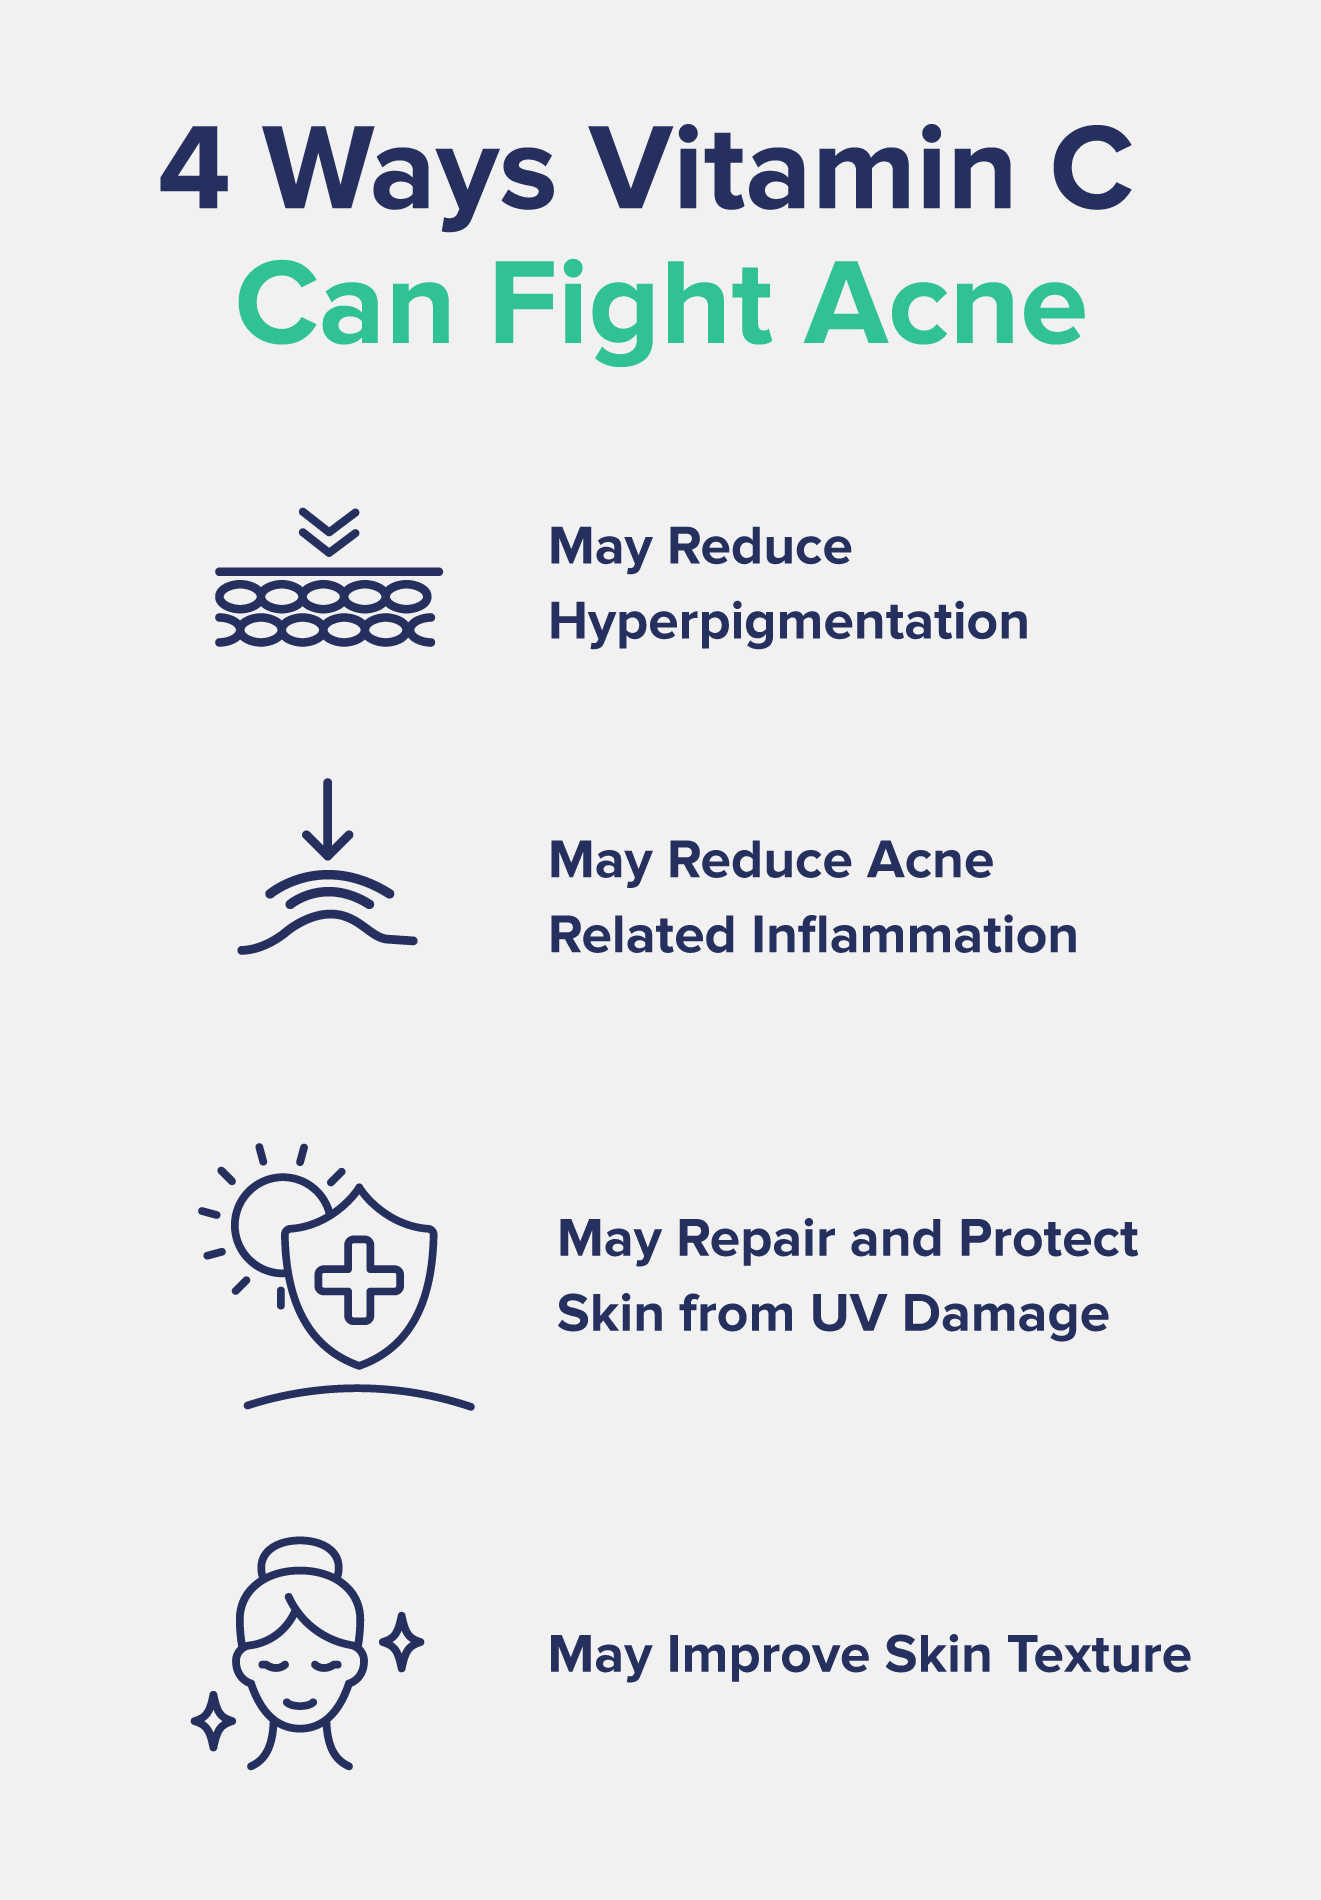 A graphic entitled "4 Ways Vitamin C Can Improve Skin and Fight Acne," which includes reducing hyperpigmentation and acne-related inflammation, protecting the skin from UV damage, and improving skin texture, all with accompanying images.